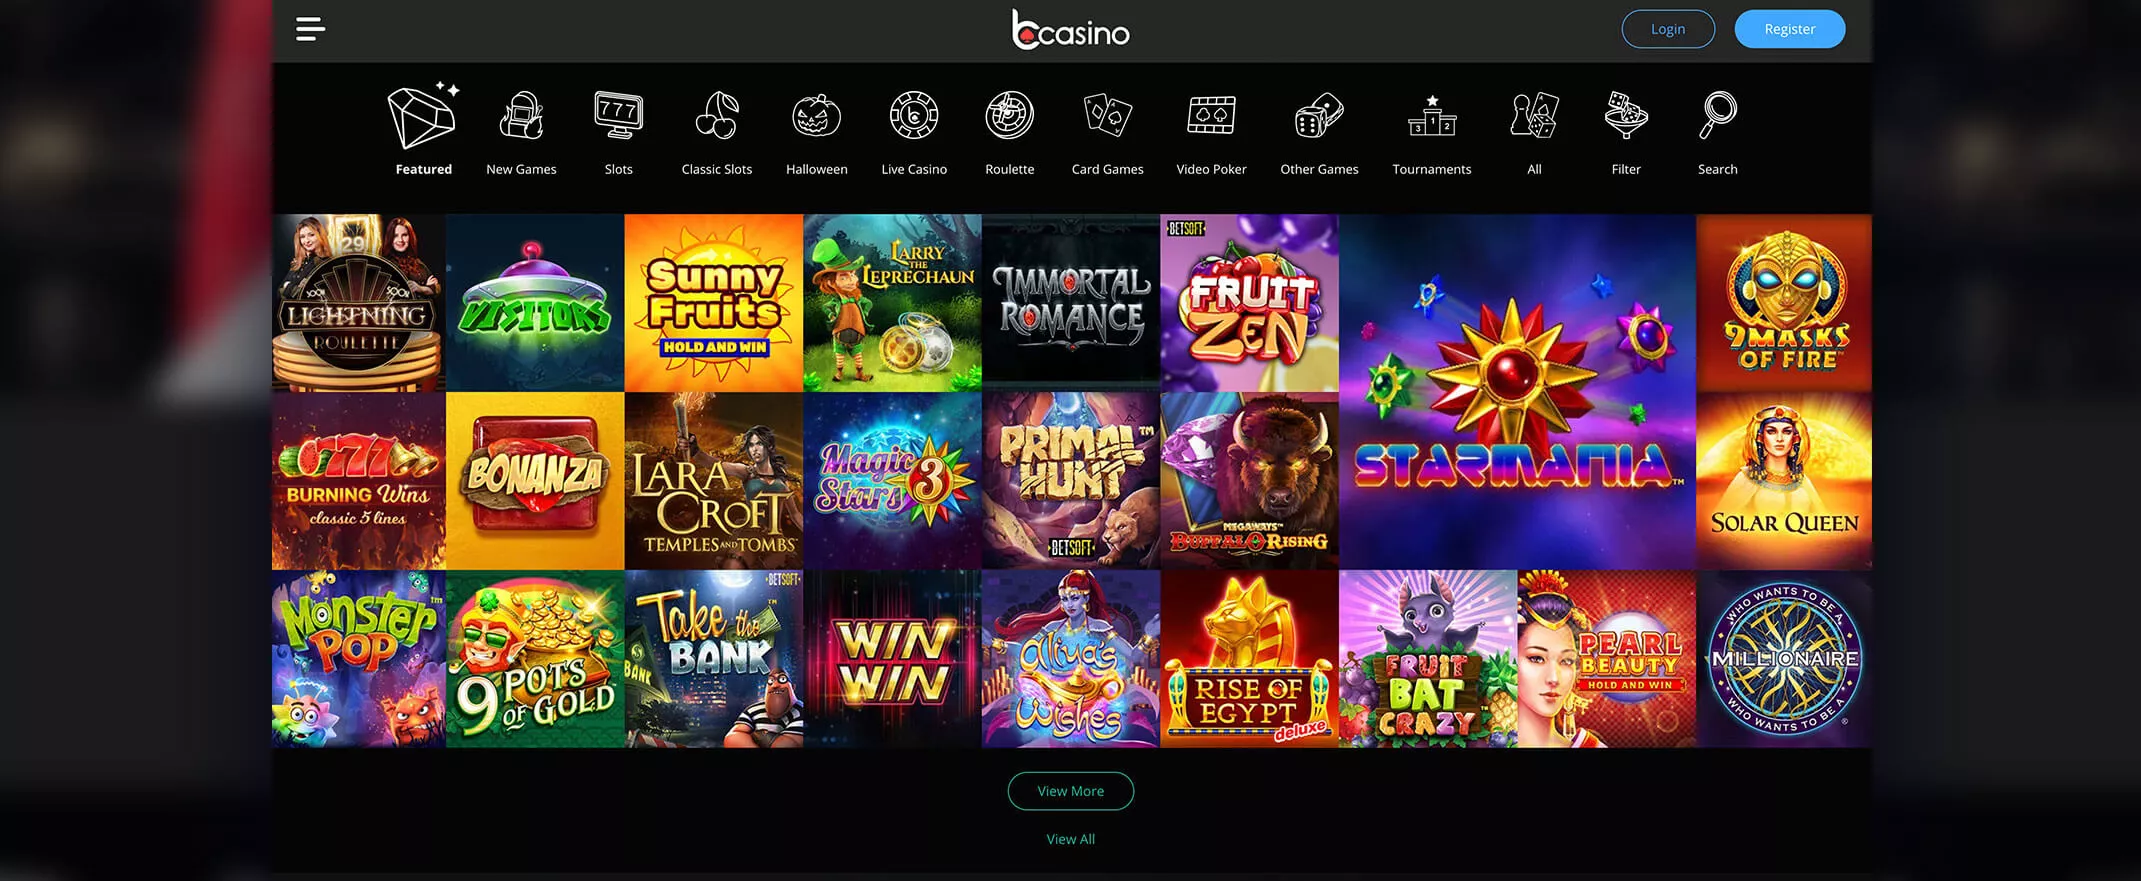 bCasino screenshot of the games page